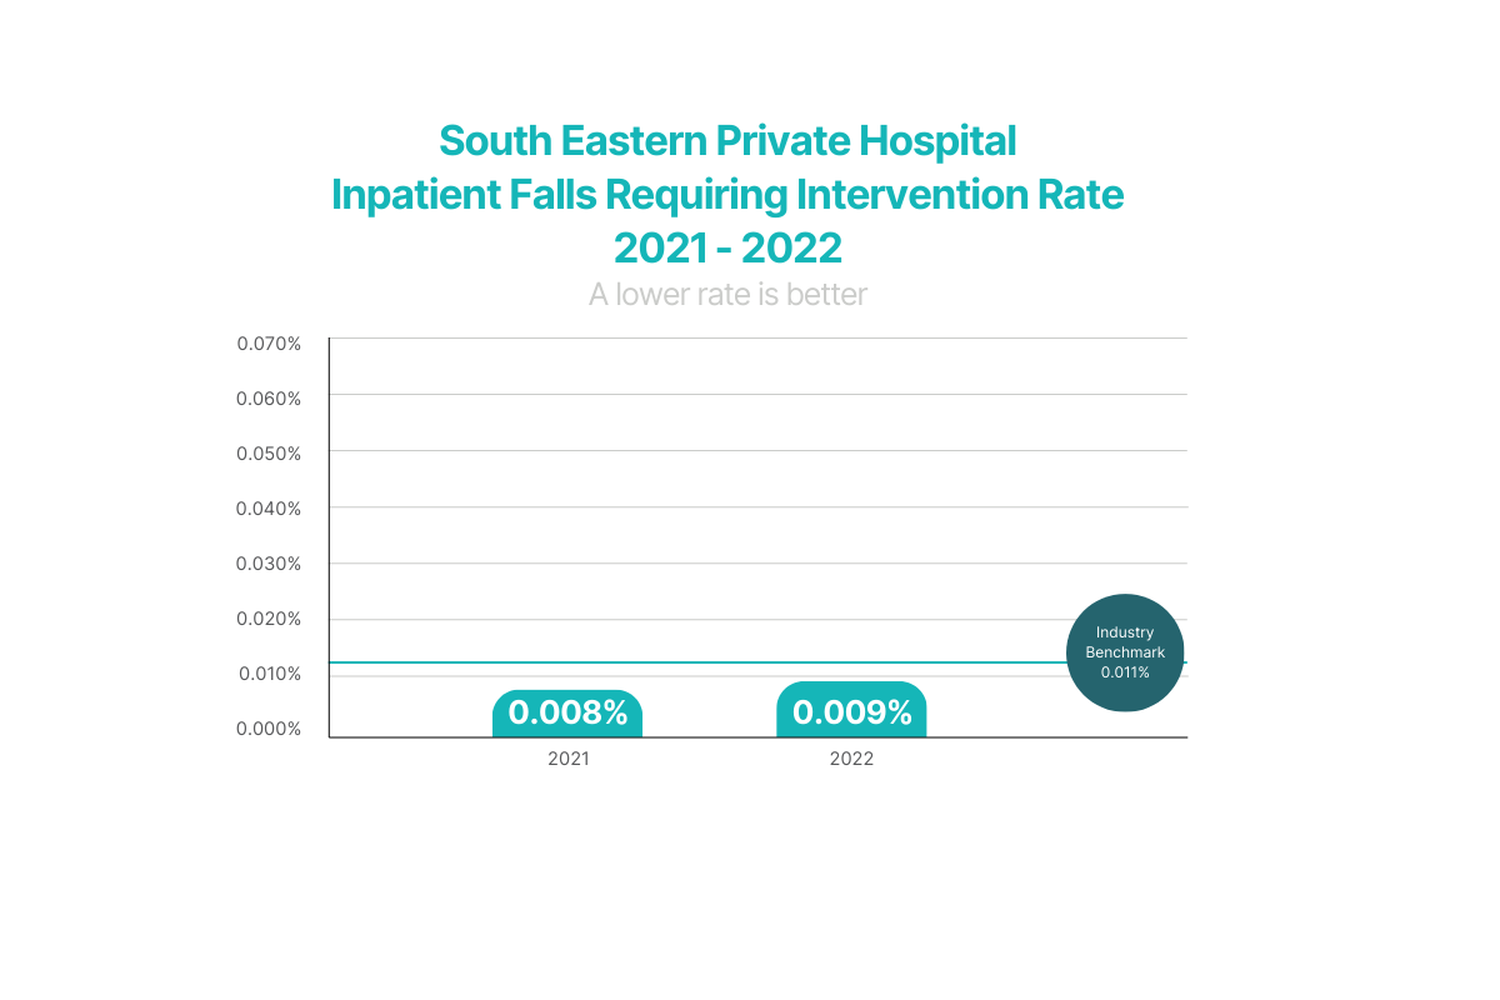 Inpatients Falls Requiring Intervention Rate